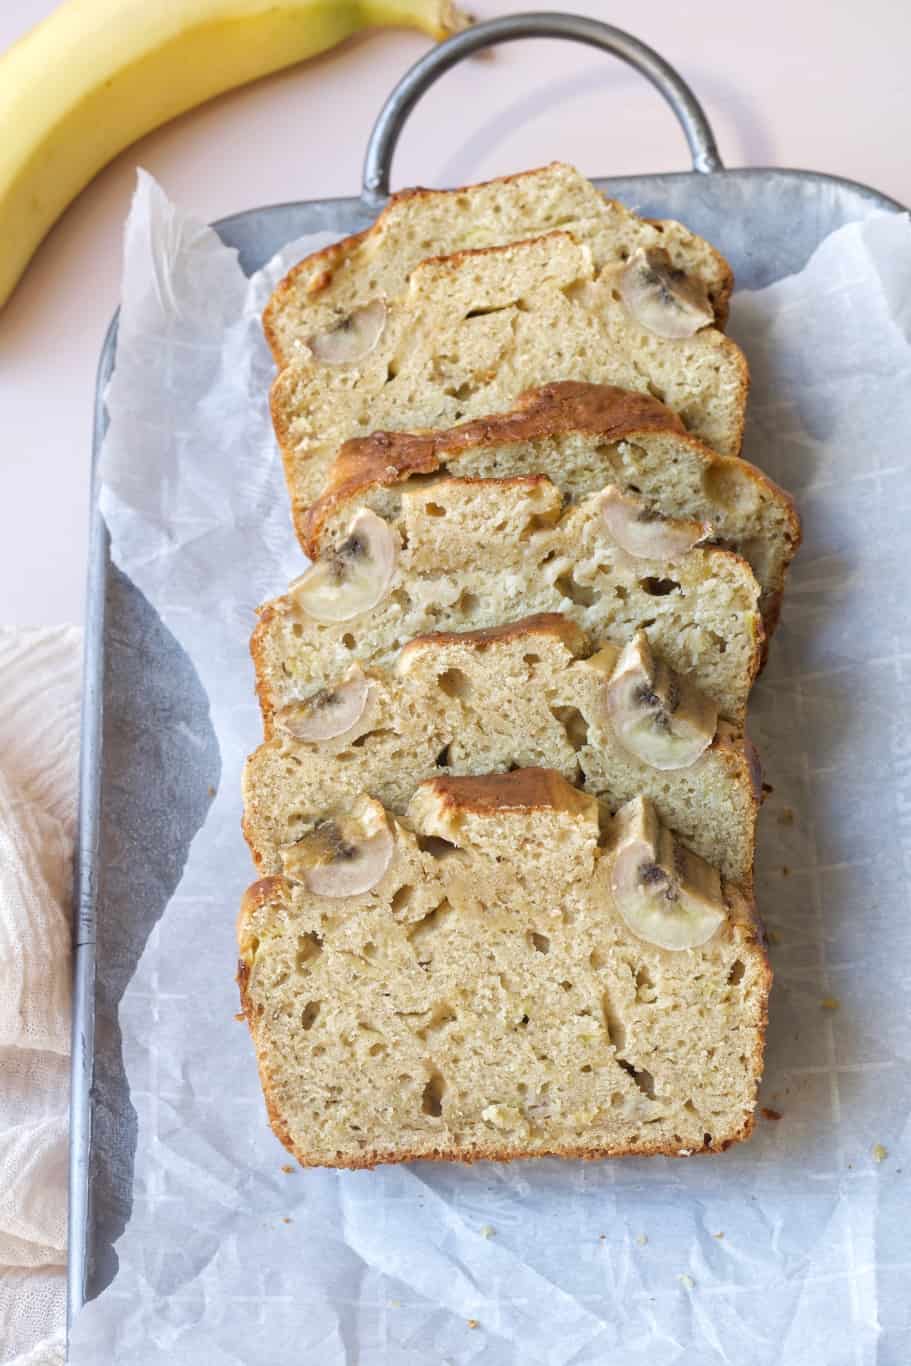 Soft and moist banana bread made easy without baking soda! Perfect for breakfast or a sweet snack. Packed with banana flavor!